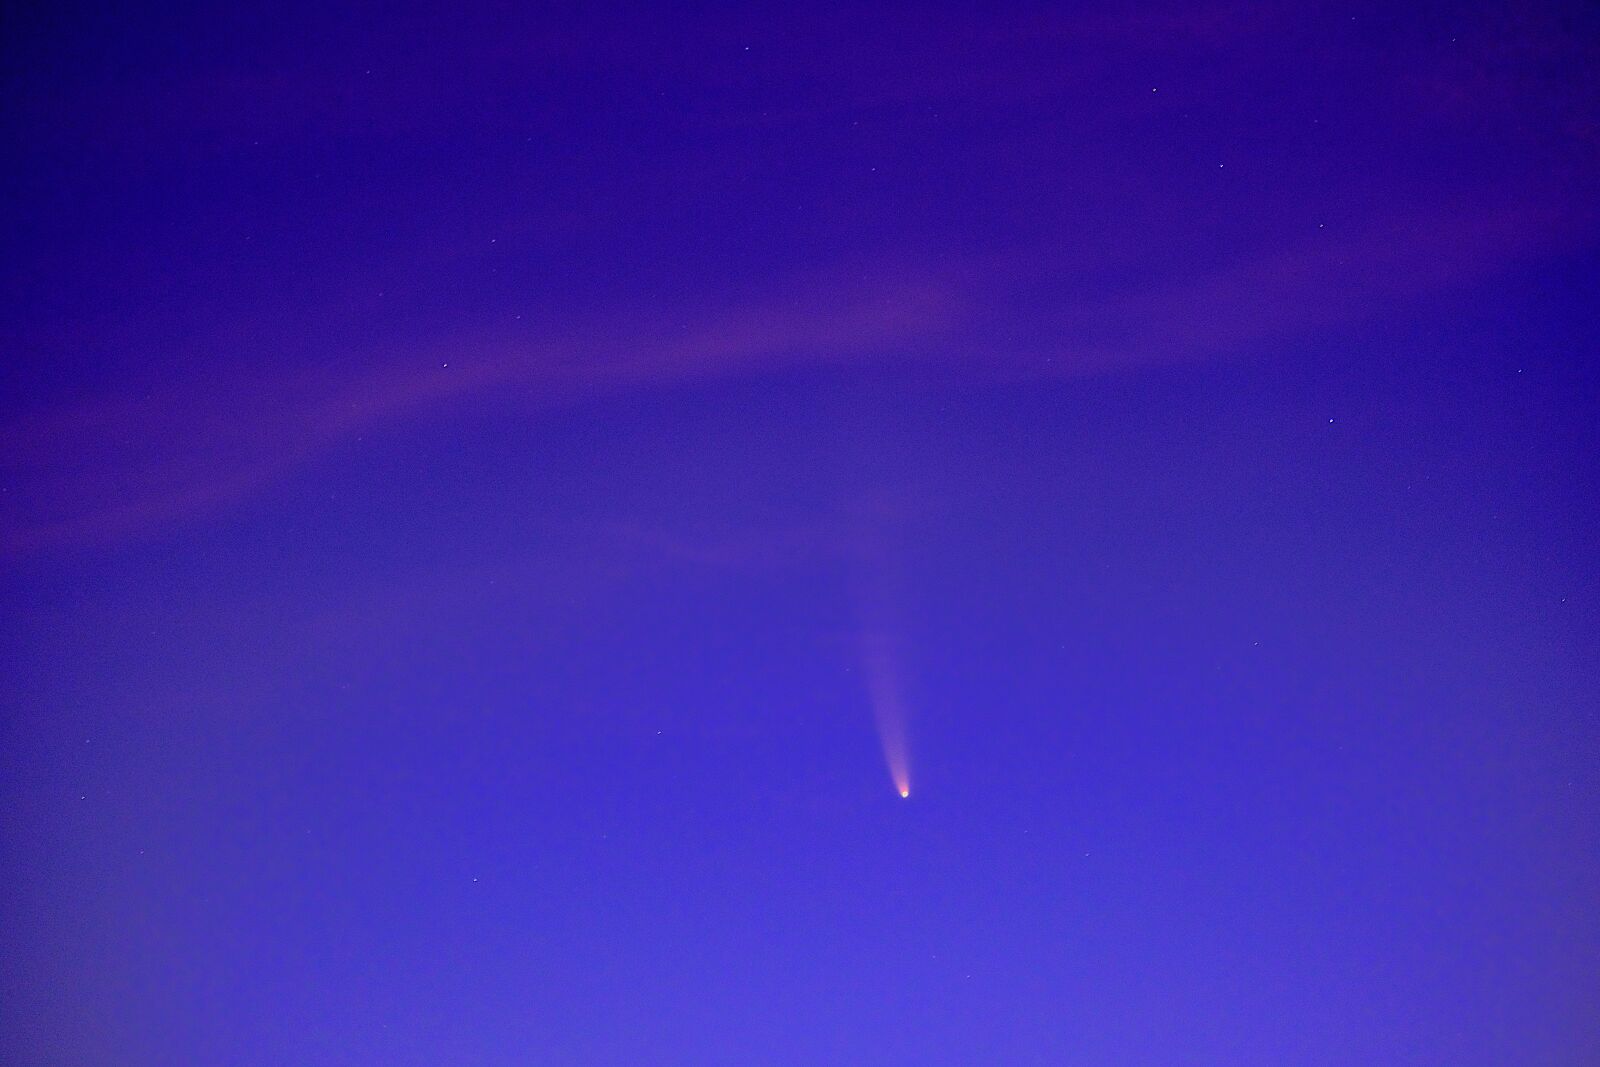 Fujifilm X-T3 sample photo. Comet, comet neowise, neowise photography